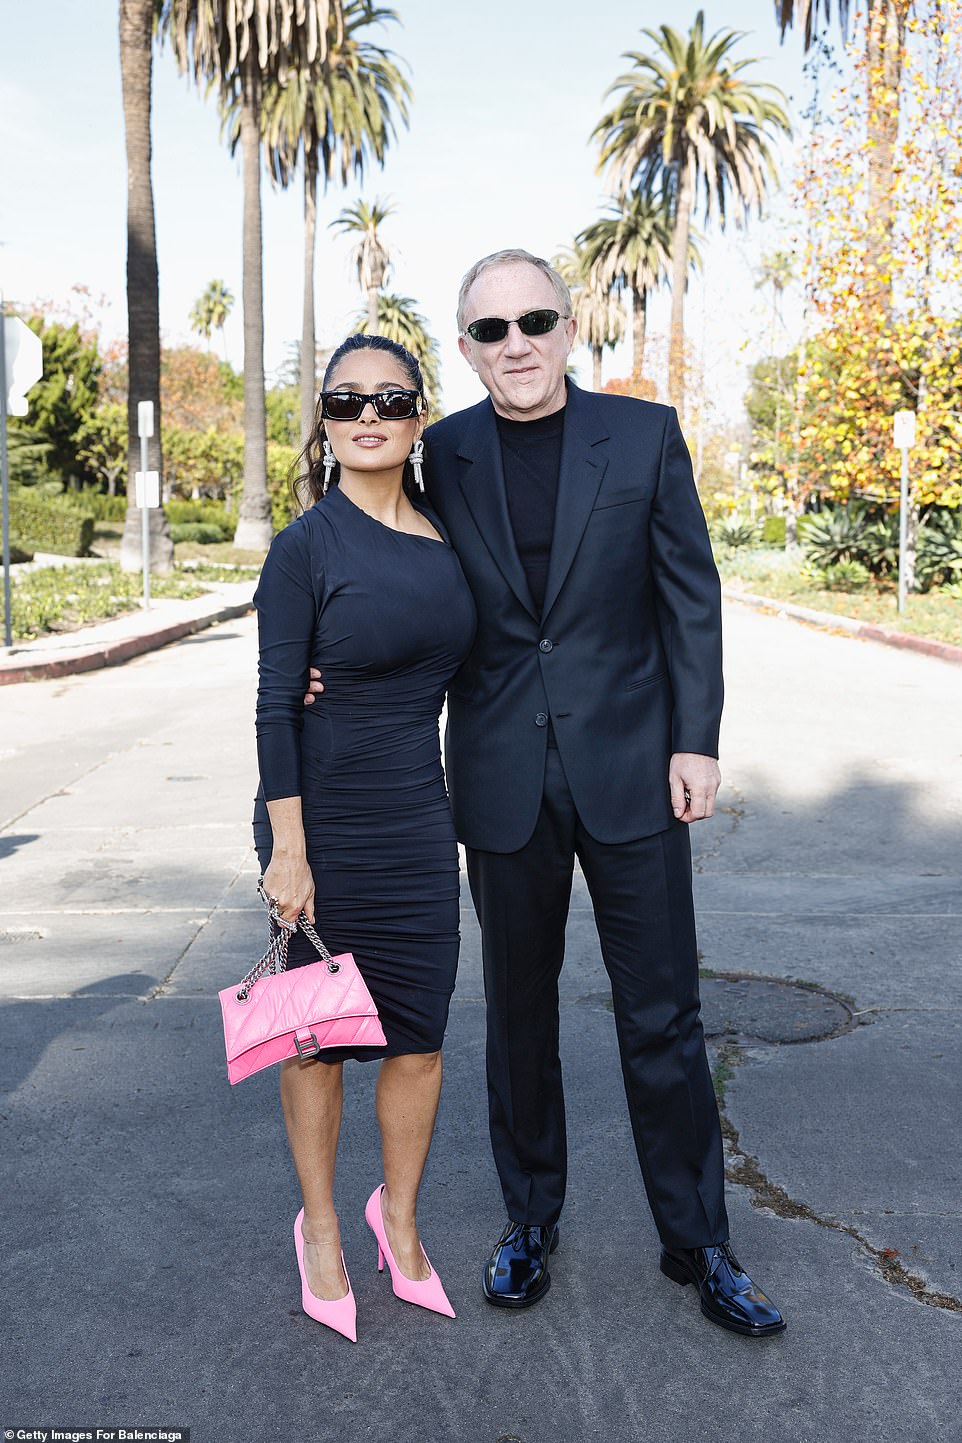 The CEO of Kering looked dapper in a black suit, black shirt and sunglasses